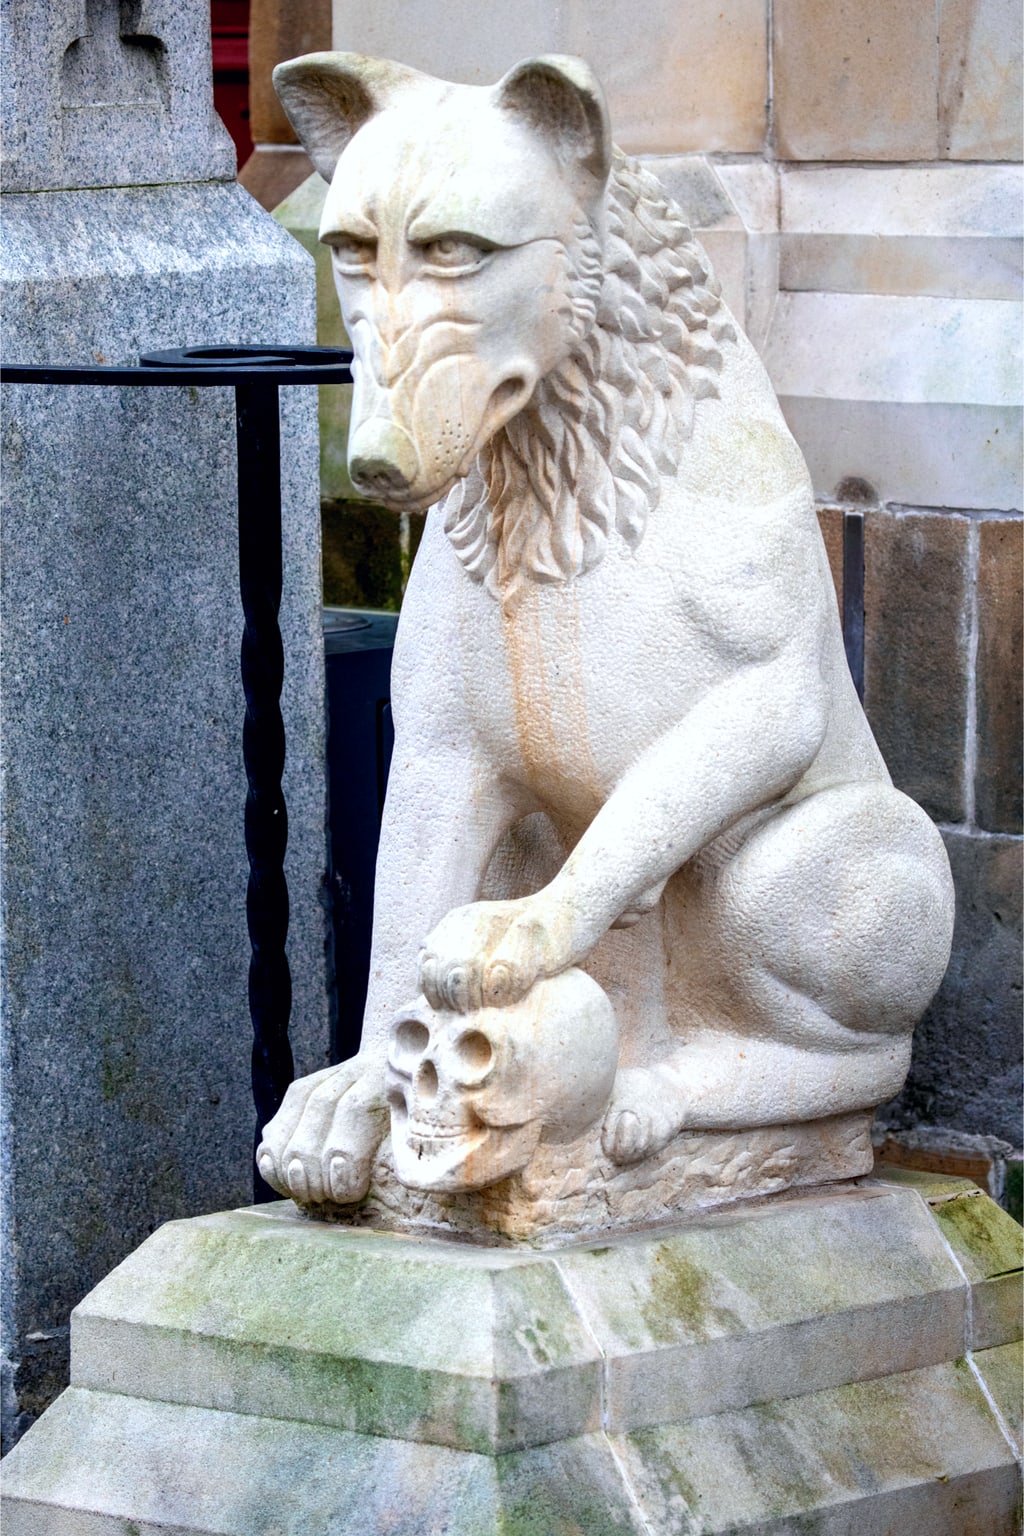 A sculptured stone Wolf guards the entrance to the historic Inverness Town House in the city of Inverness, Scotland